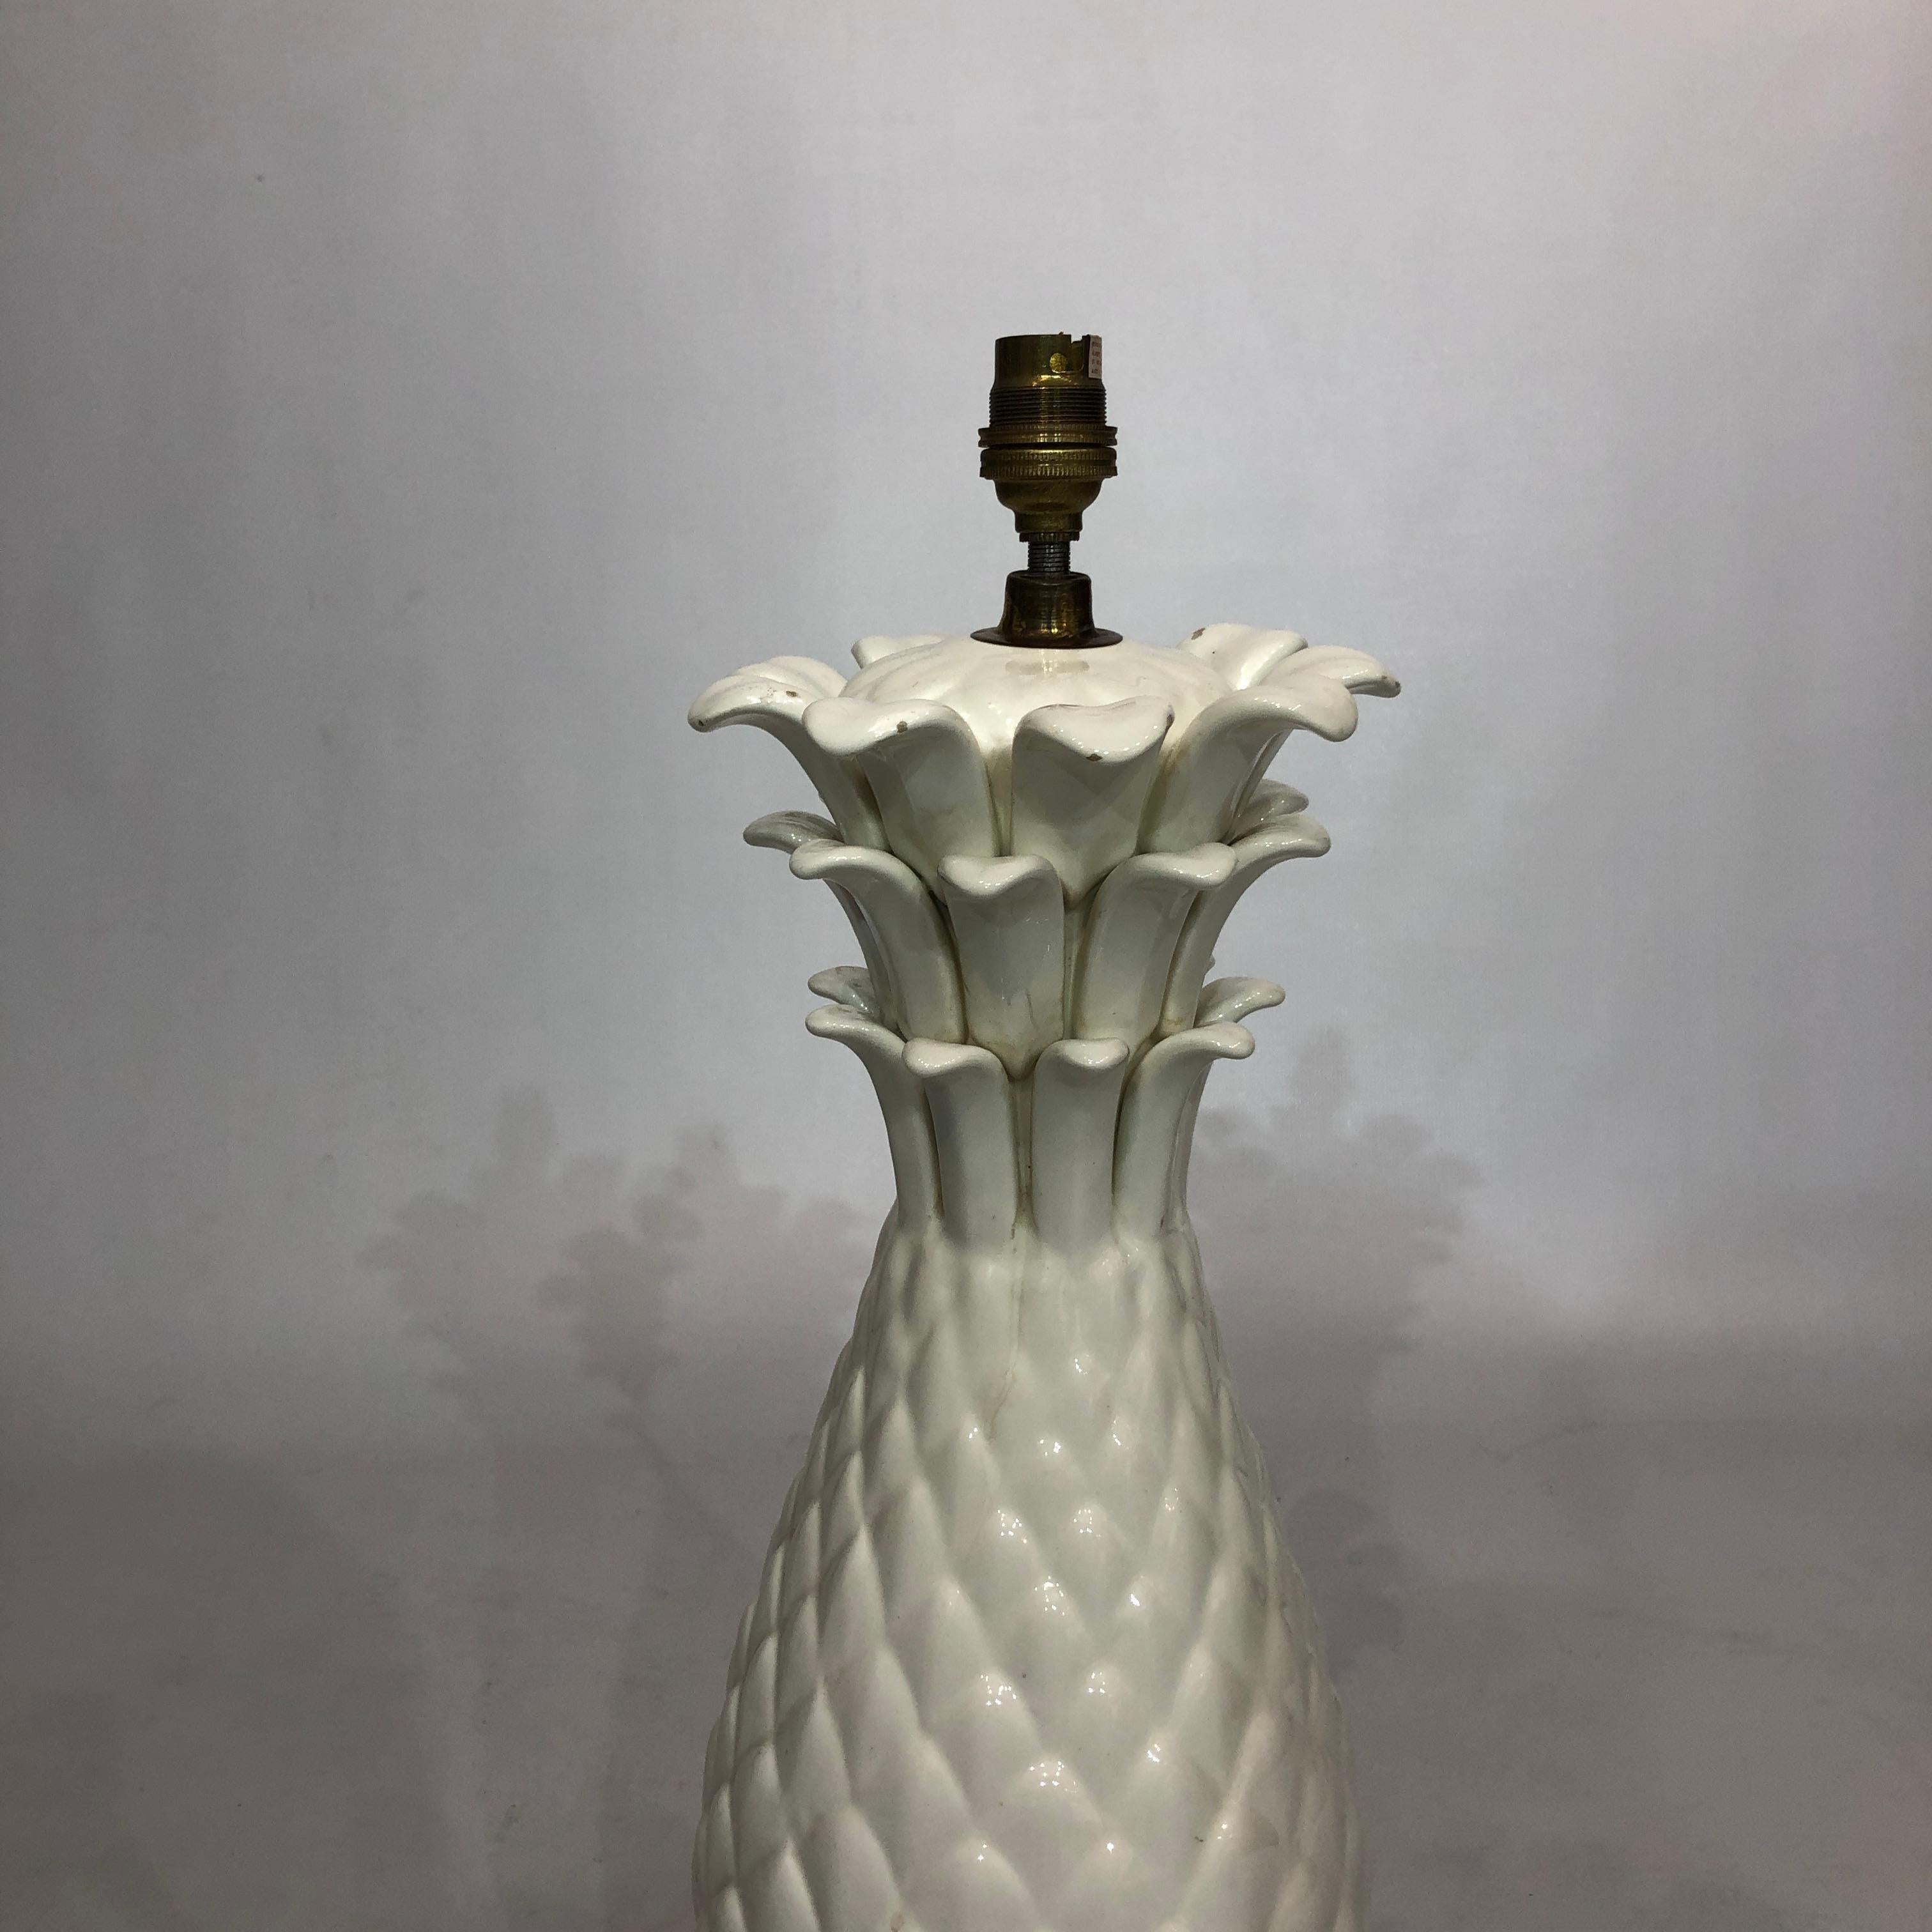 White Ceramic Pineapple Tall Table Lamp 1950s Hollywood Regency 1960s midcentury In Good Condition For Sale In London, GB